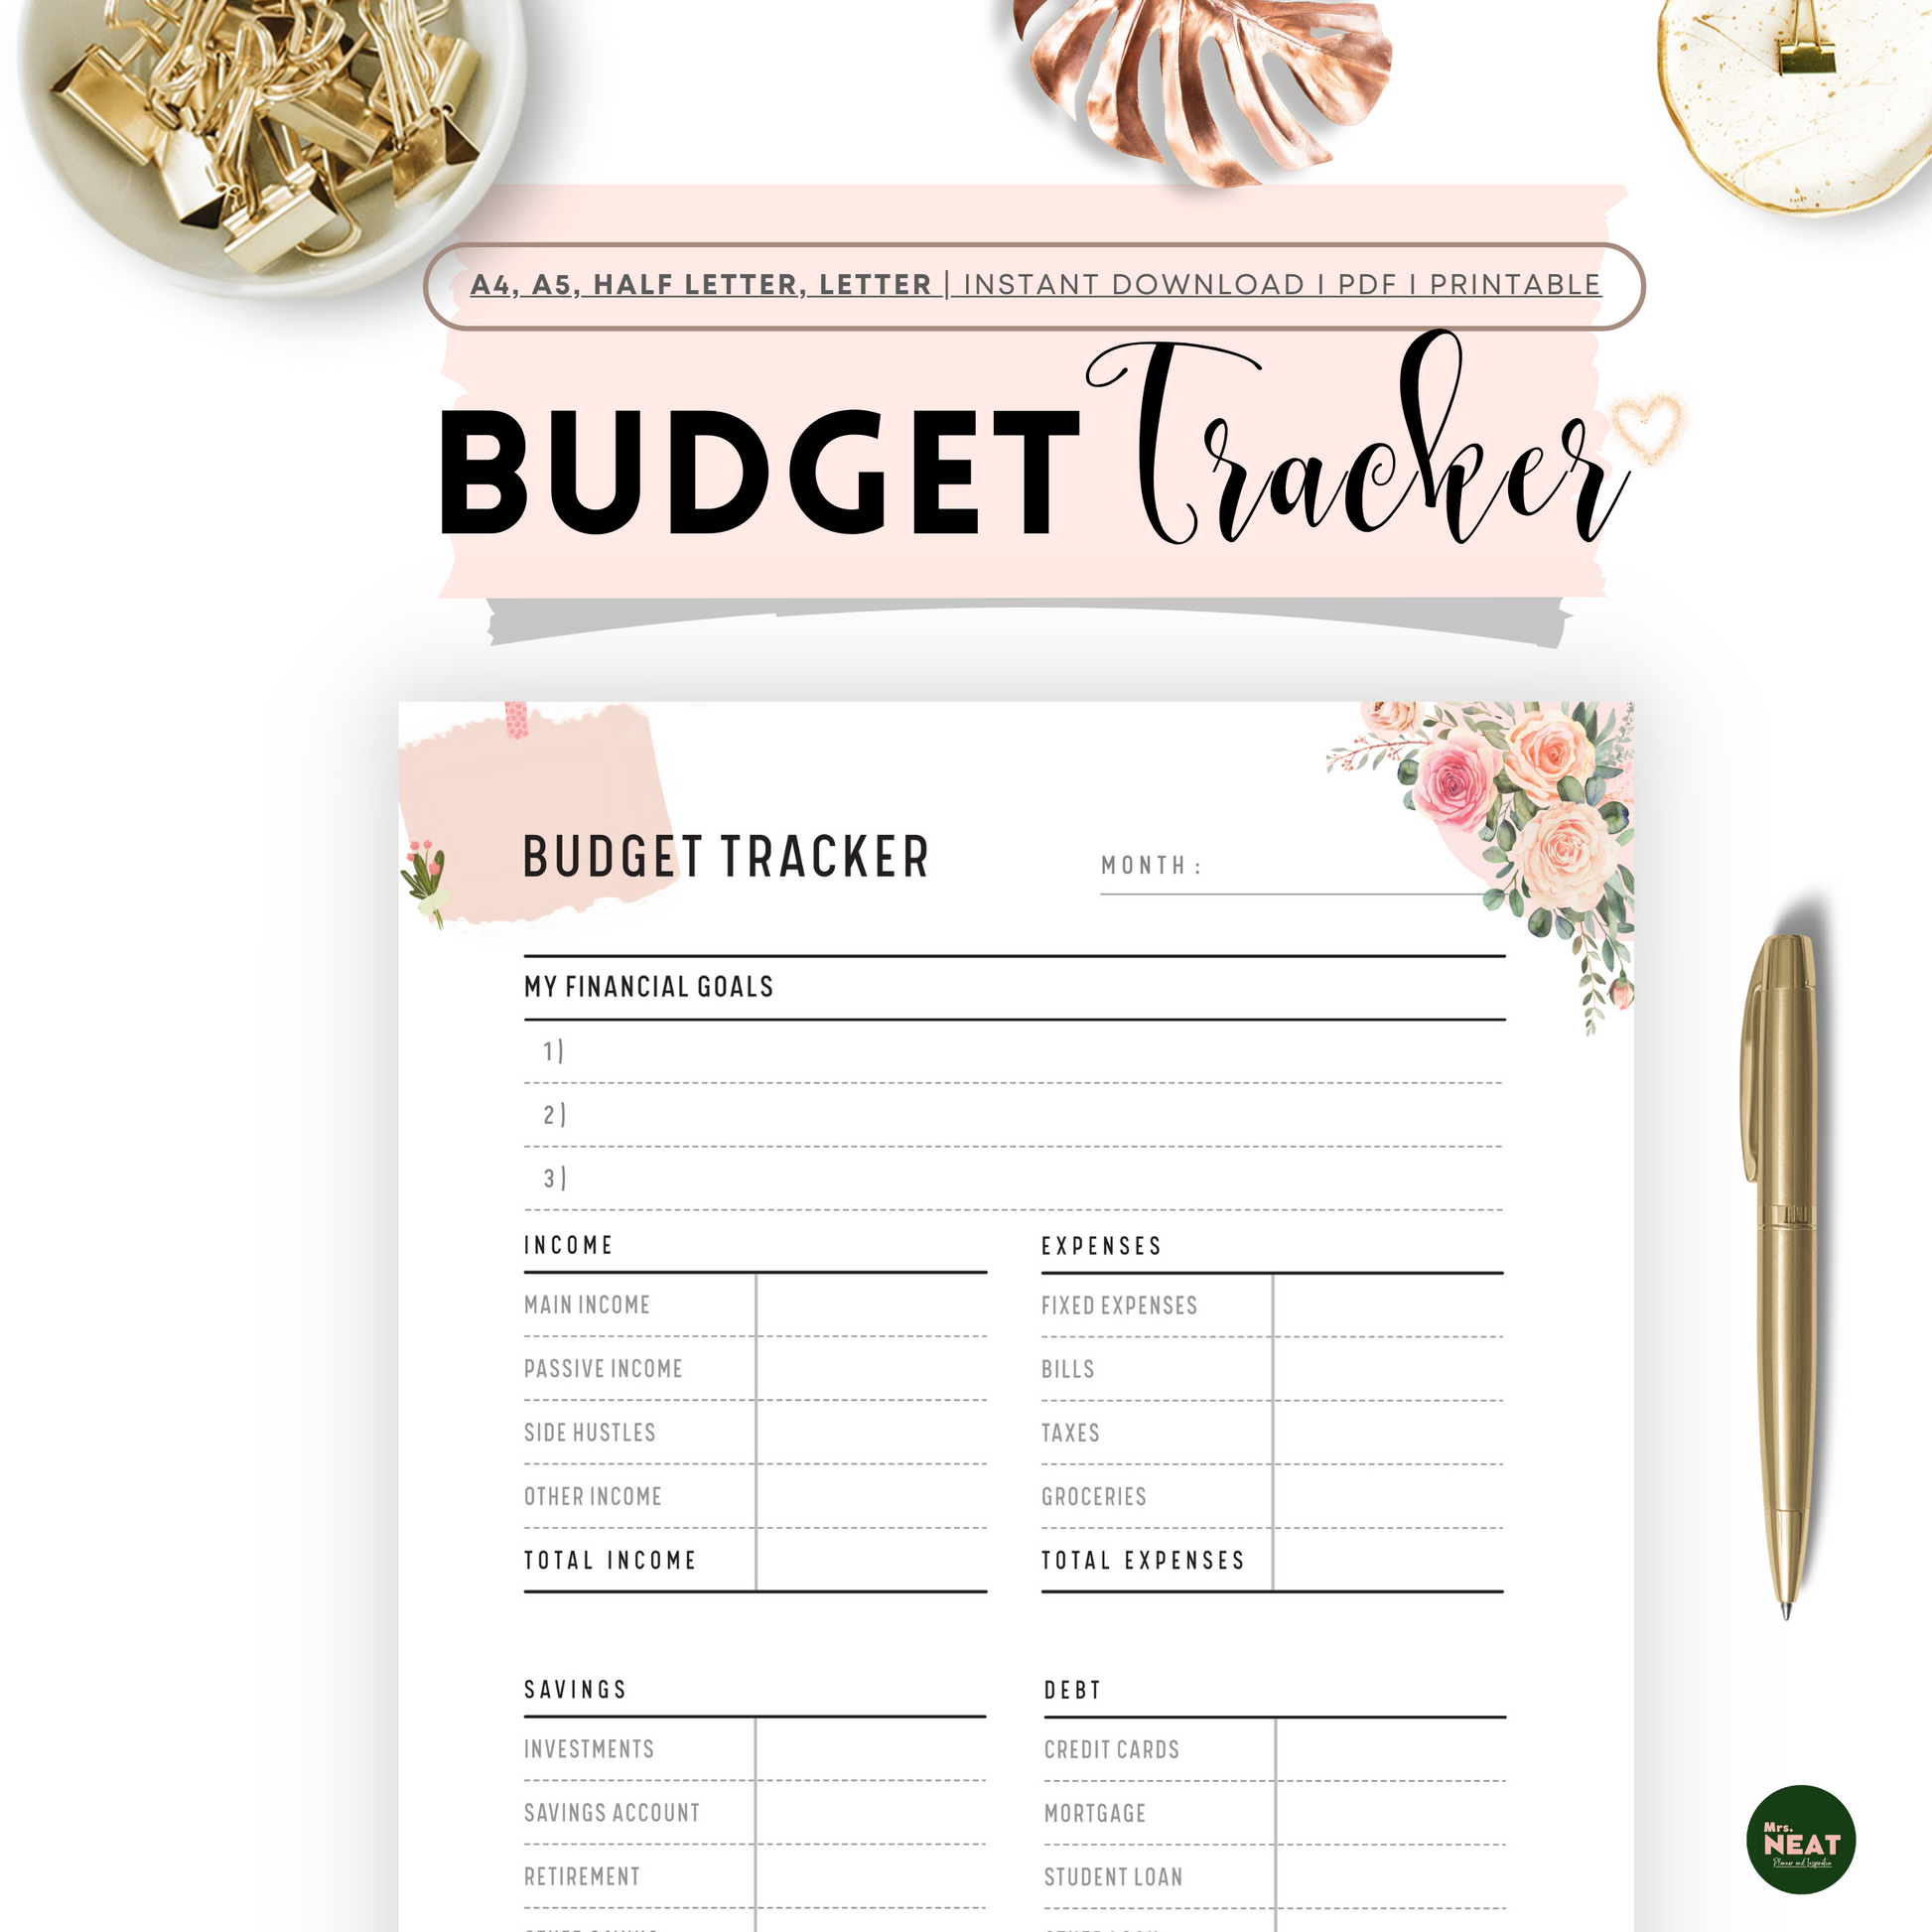 Cute and Beautiful Pink Floral Budget Tracker Planner in Minimalist Design